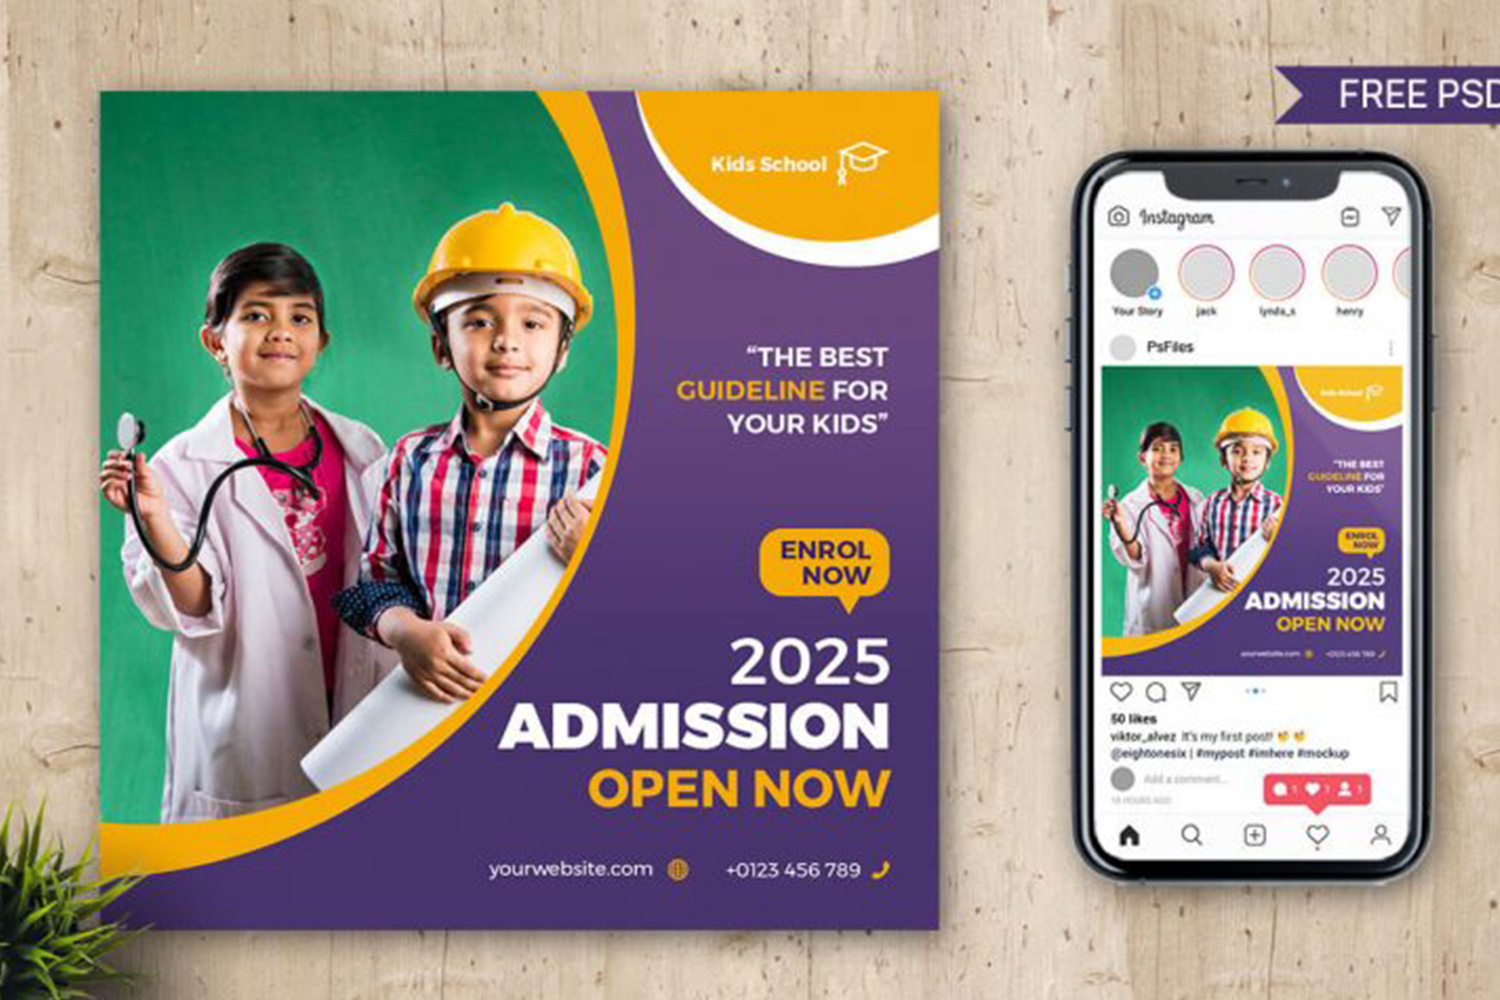 School Admission Open Instagram Post Design Template PSD Free